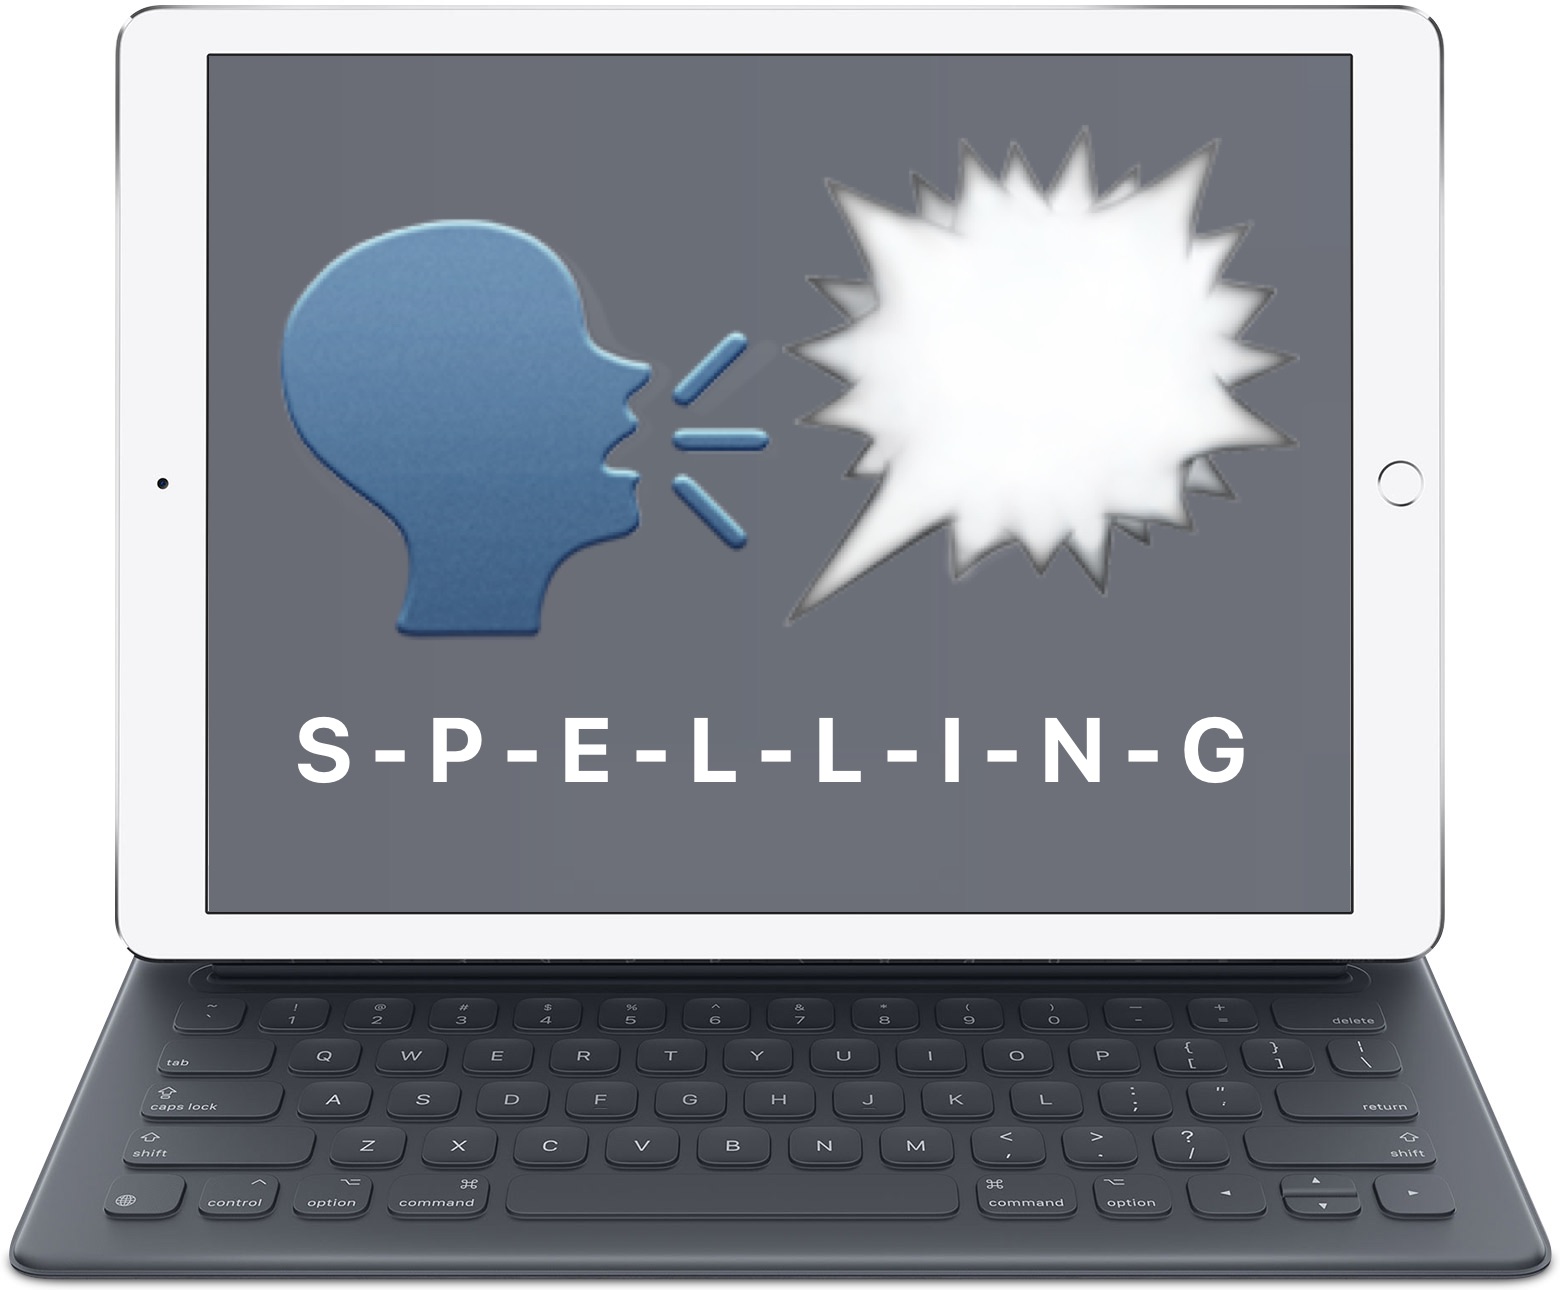 How to Spell Words by Speaking on iPhone or iPad